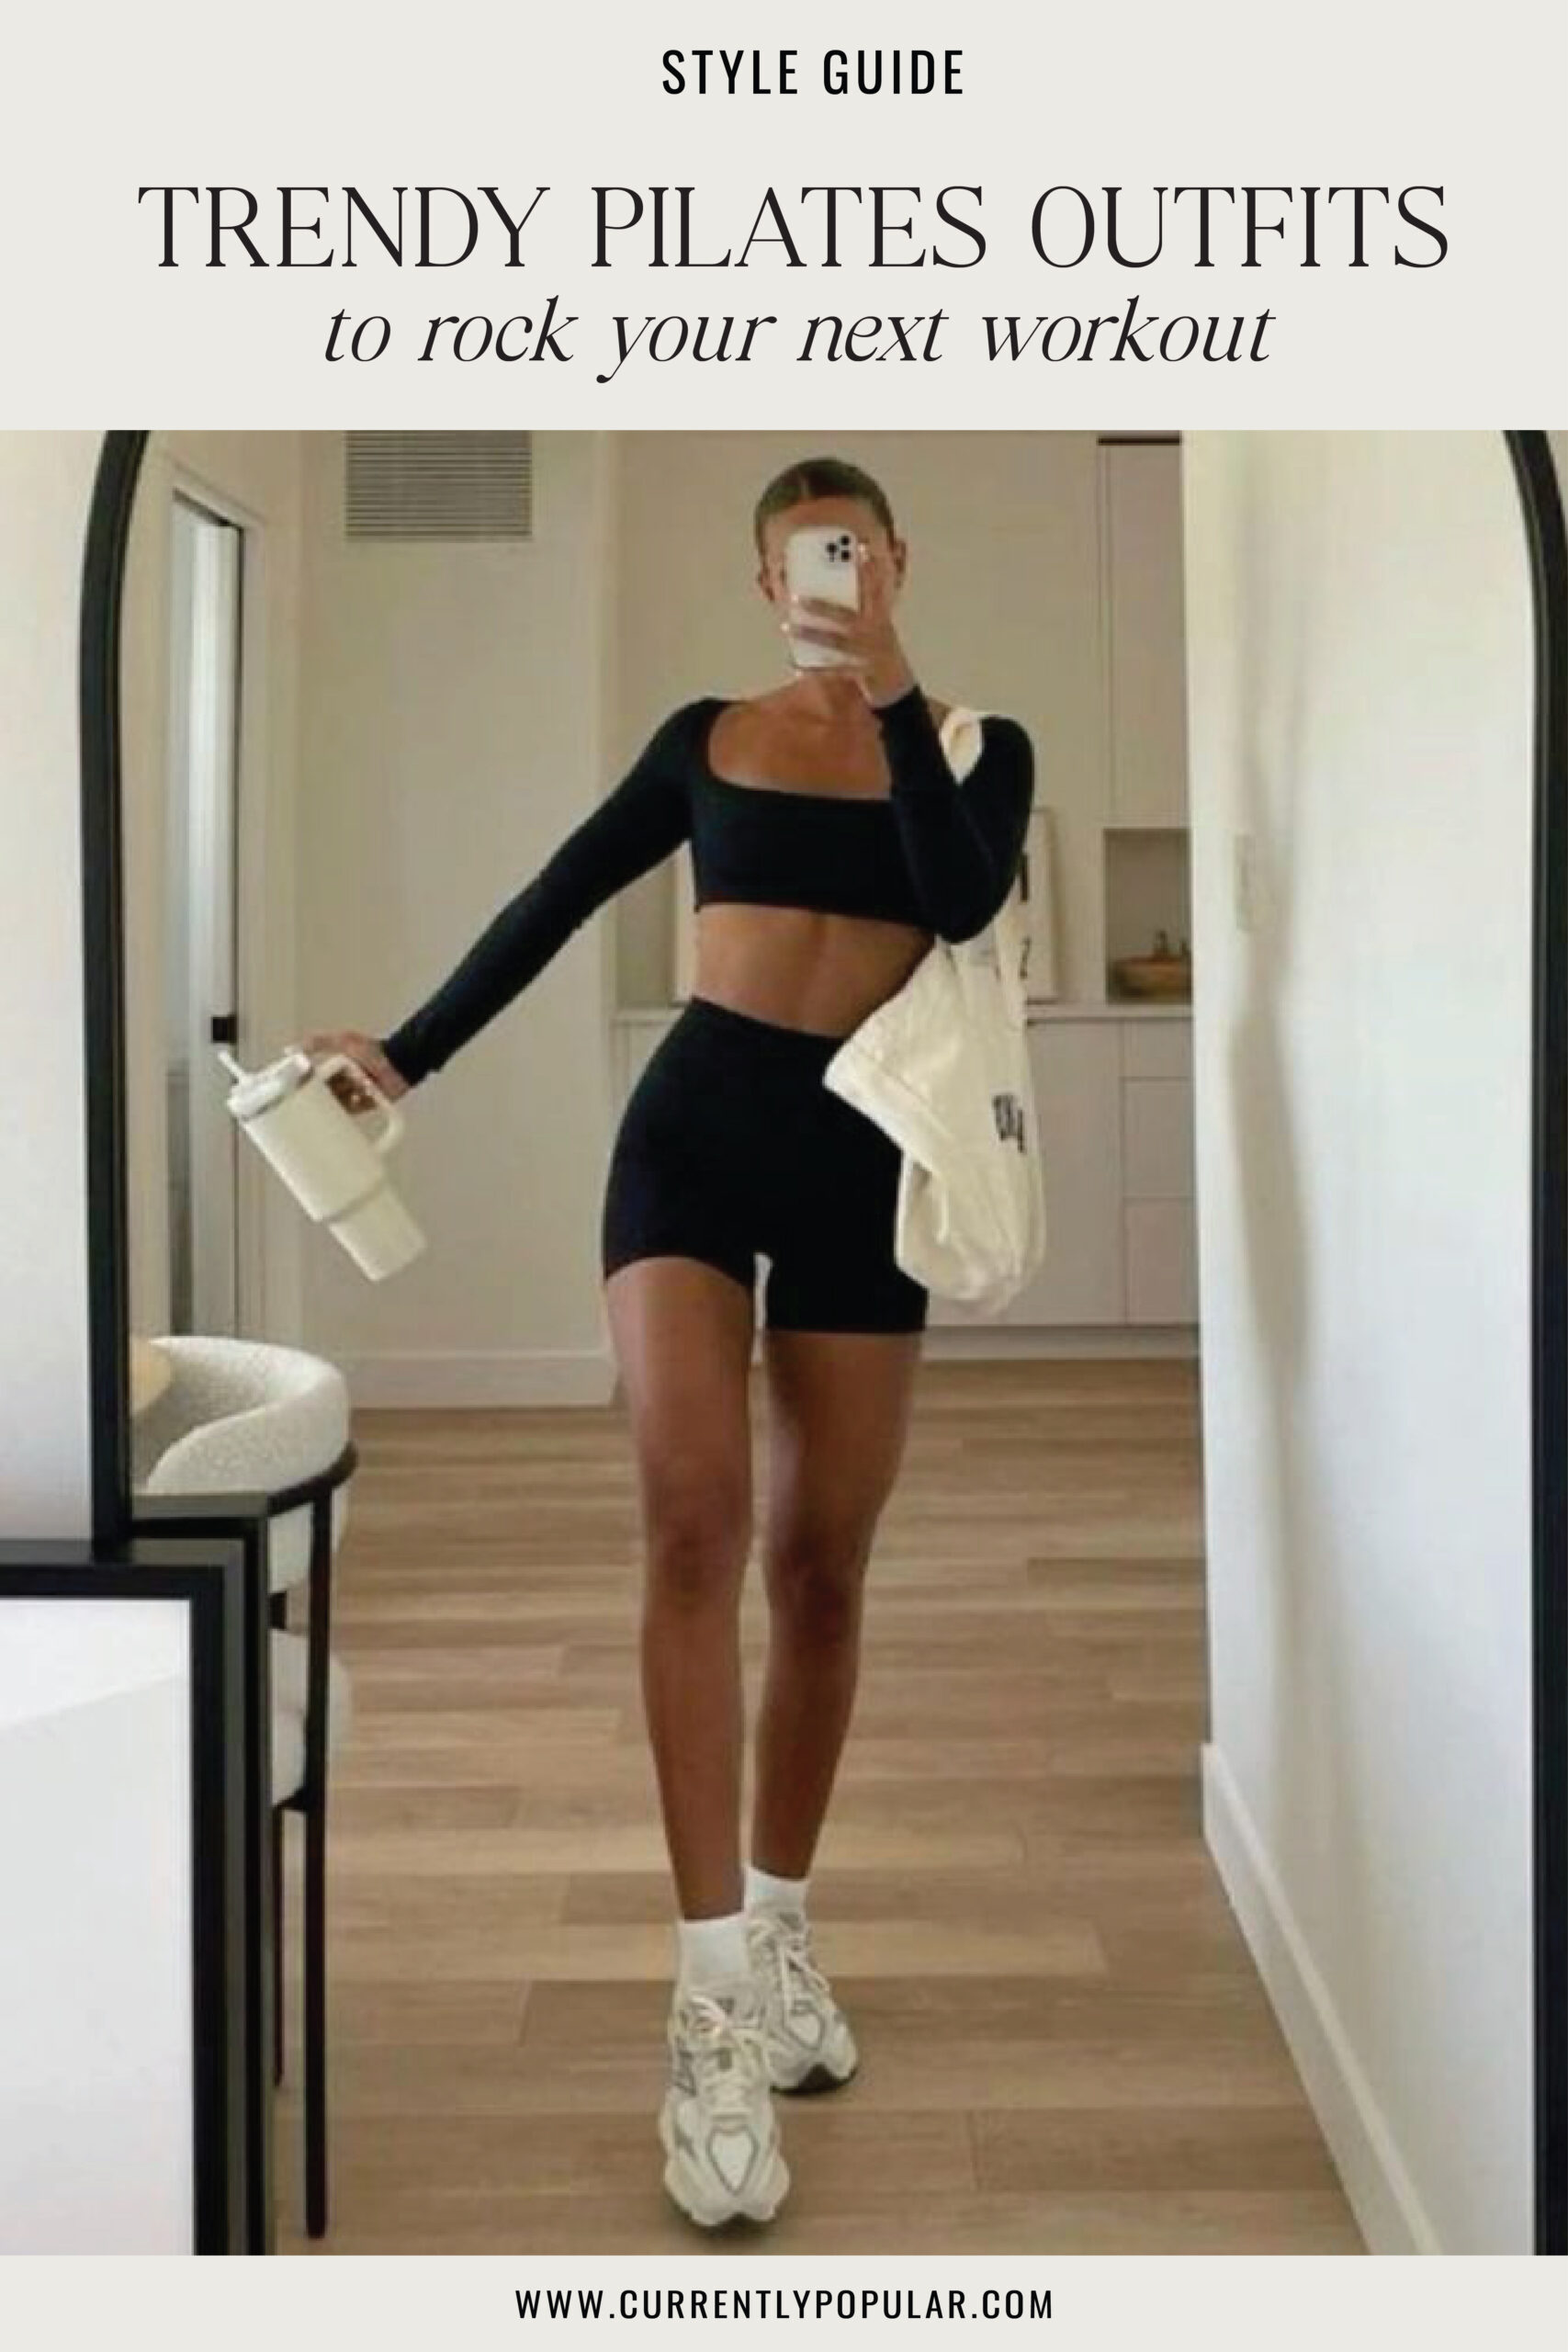 pilates outfits, pilates outfits aesthetic, pilates fashion, athlesiure fits aesthetic, activewear aesthetic, activewear aesthetic summer, active sets, activewear, workout set, biker shorts outfit, activewear set, tennis outfit, pickleball outfit, outfits for class college, casual outfit, black activewear, lounge sets, womens athleisure